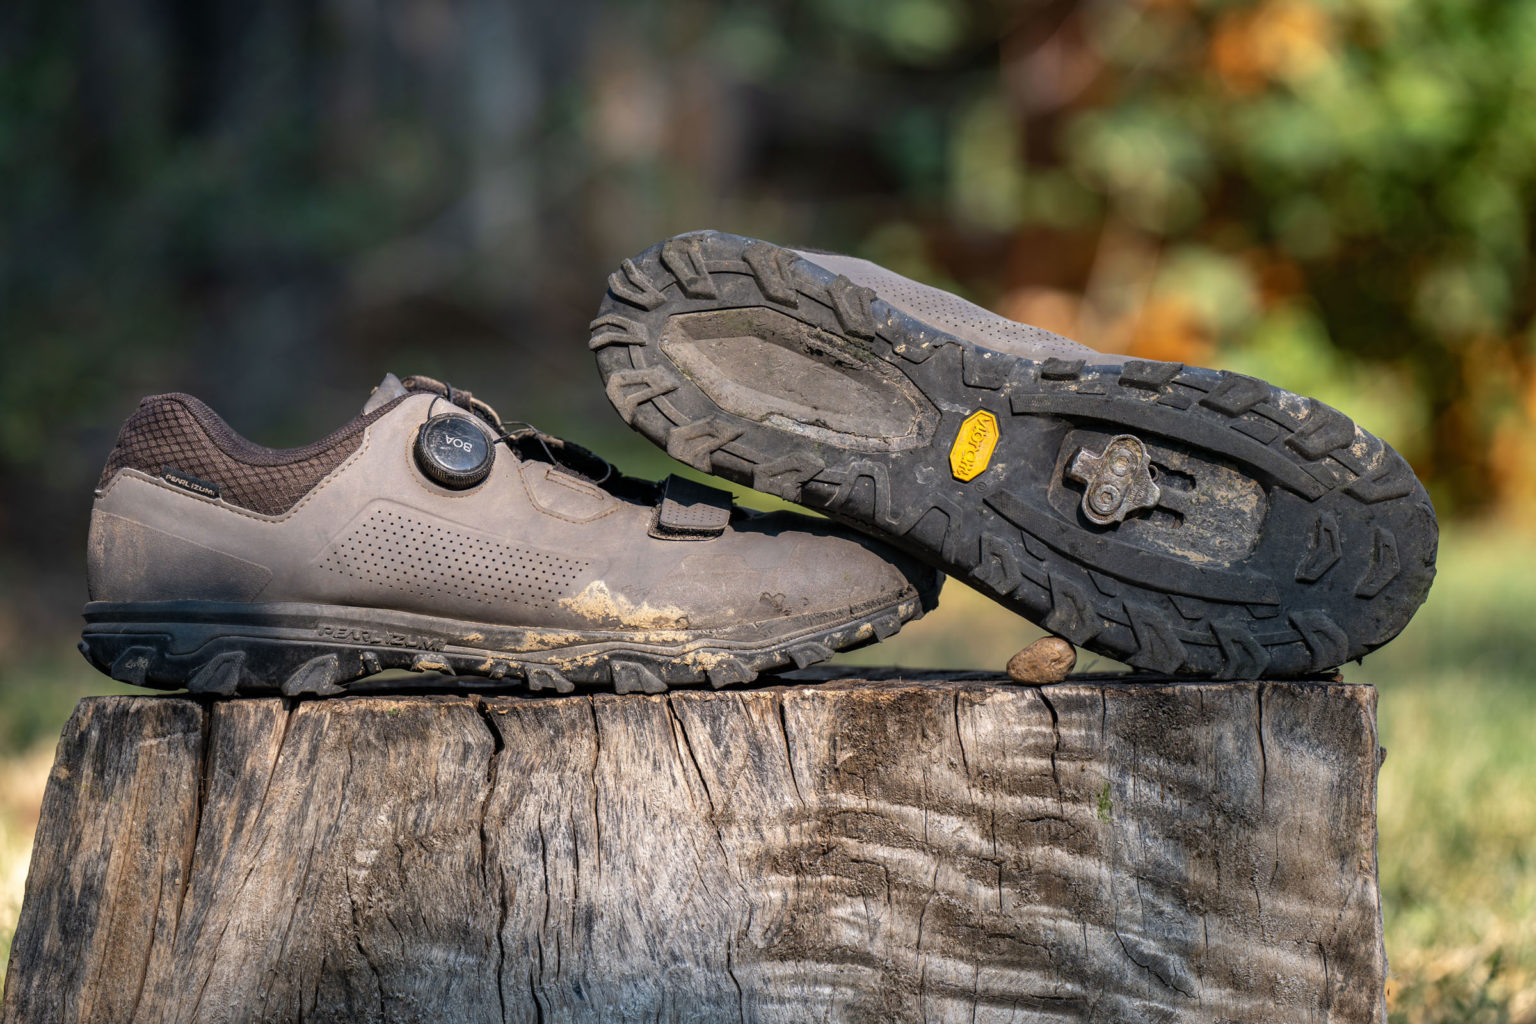 New Pearl Izumi Expedition Shoes Announced - BIKEPACKING.com